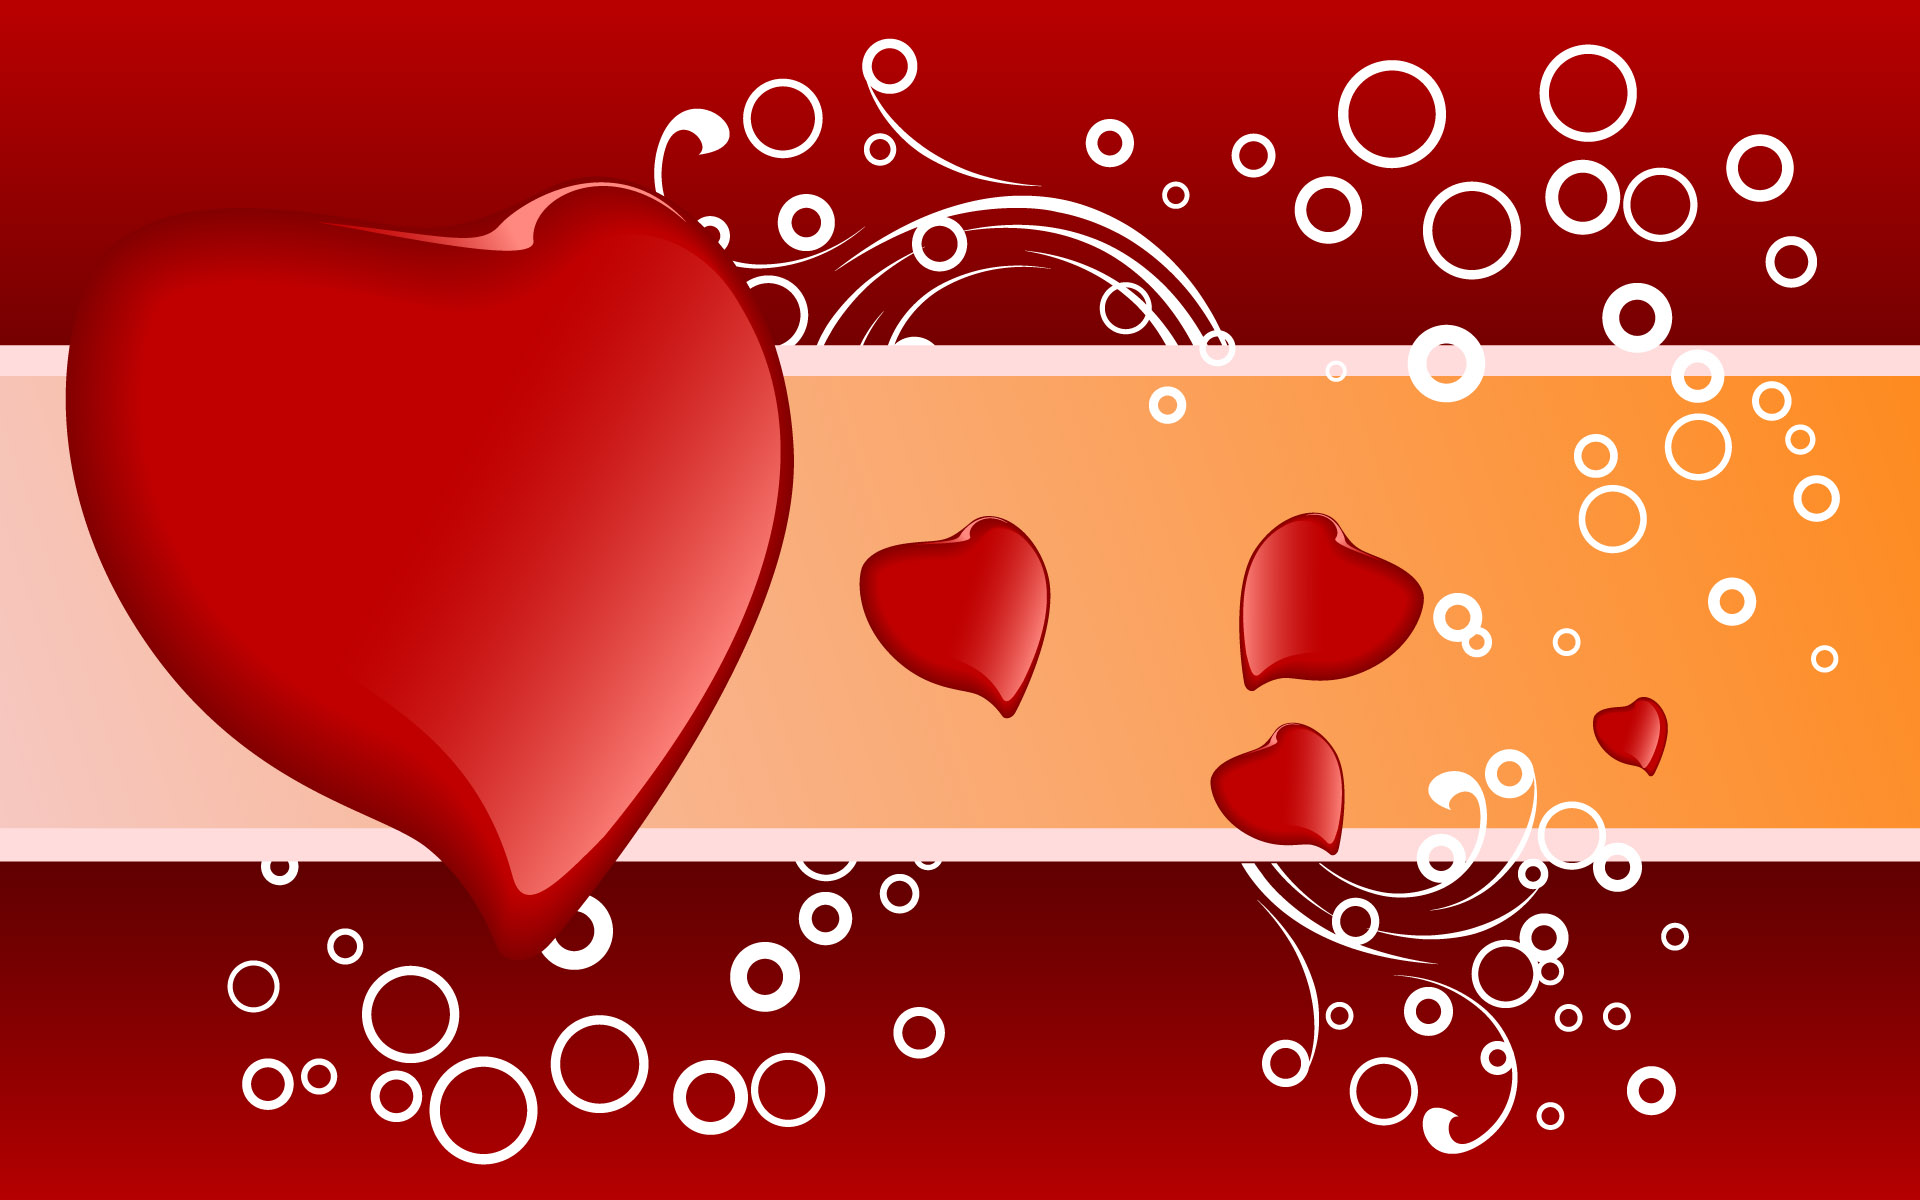 Hearts On Red Background With Circles Backgrounds For PowerPoint - Love PPT Templates1920 x 1200